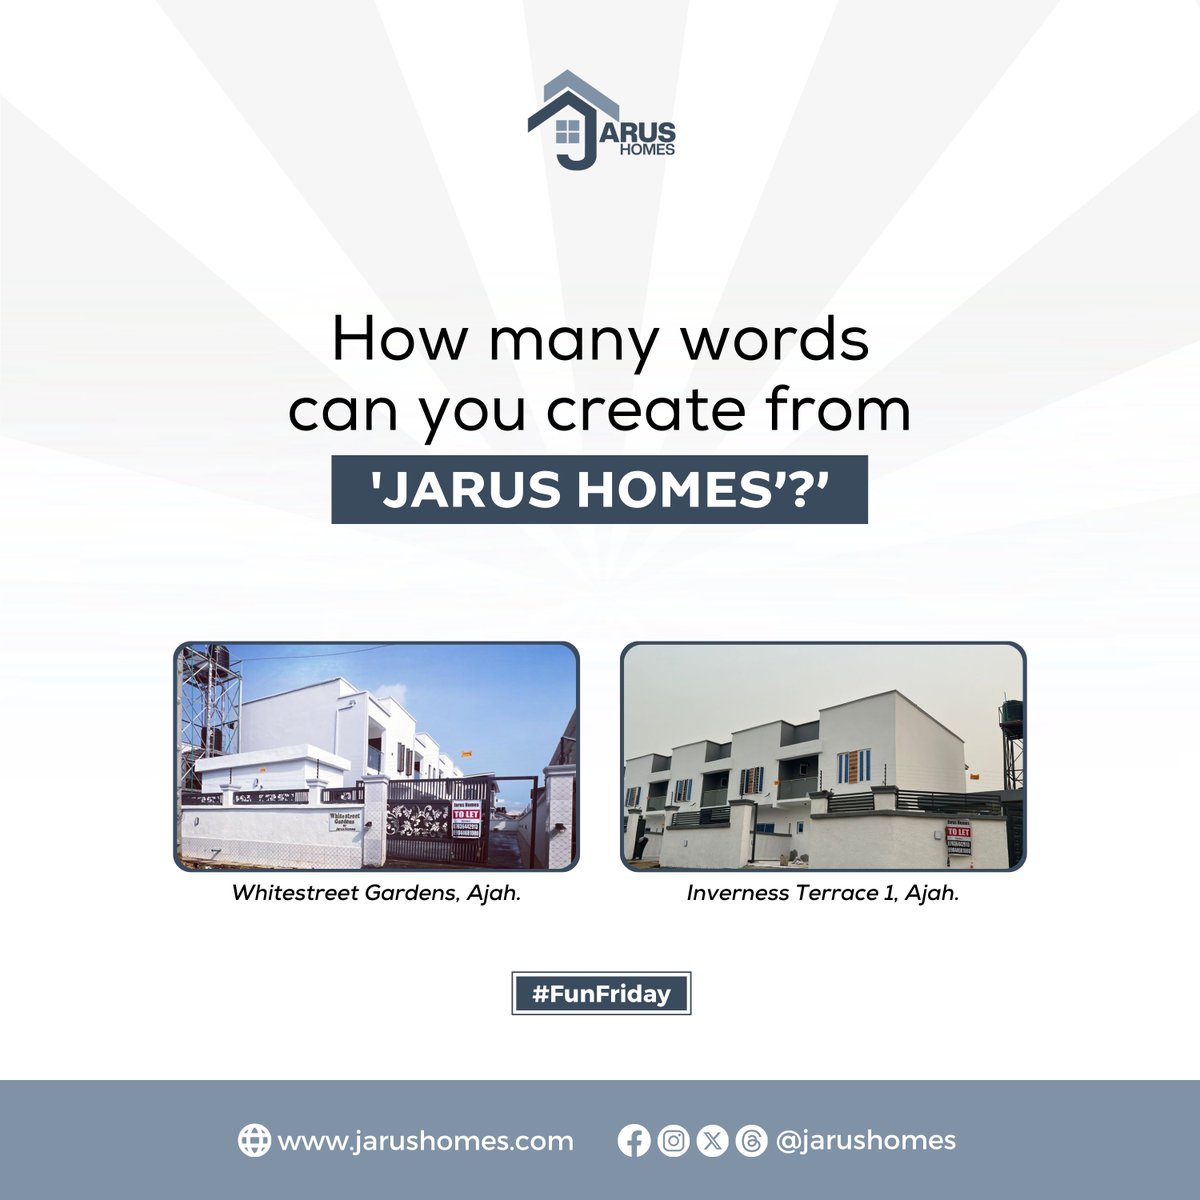 Ready for a word challenge? Put your word skills to test and share your list in the comments below! Let's see who can create the most words! #WordChallenge #FunWithWords #JarusHomes